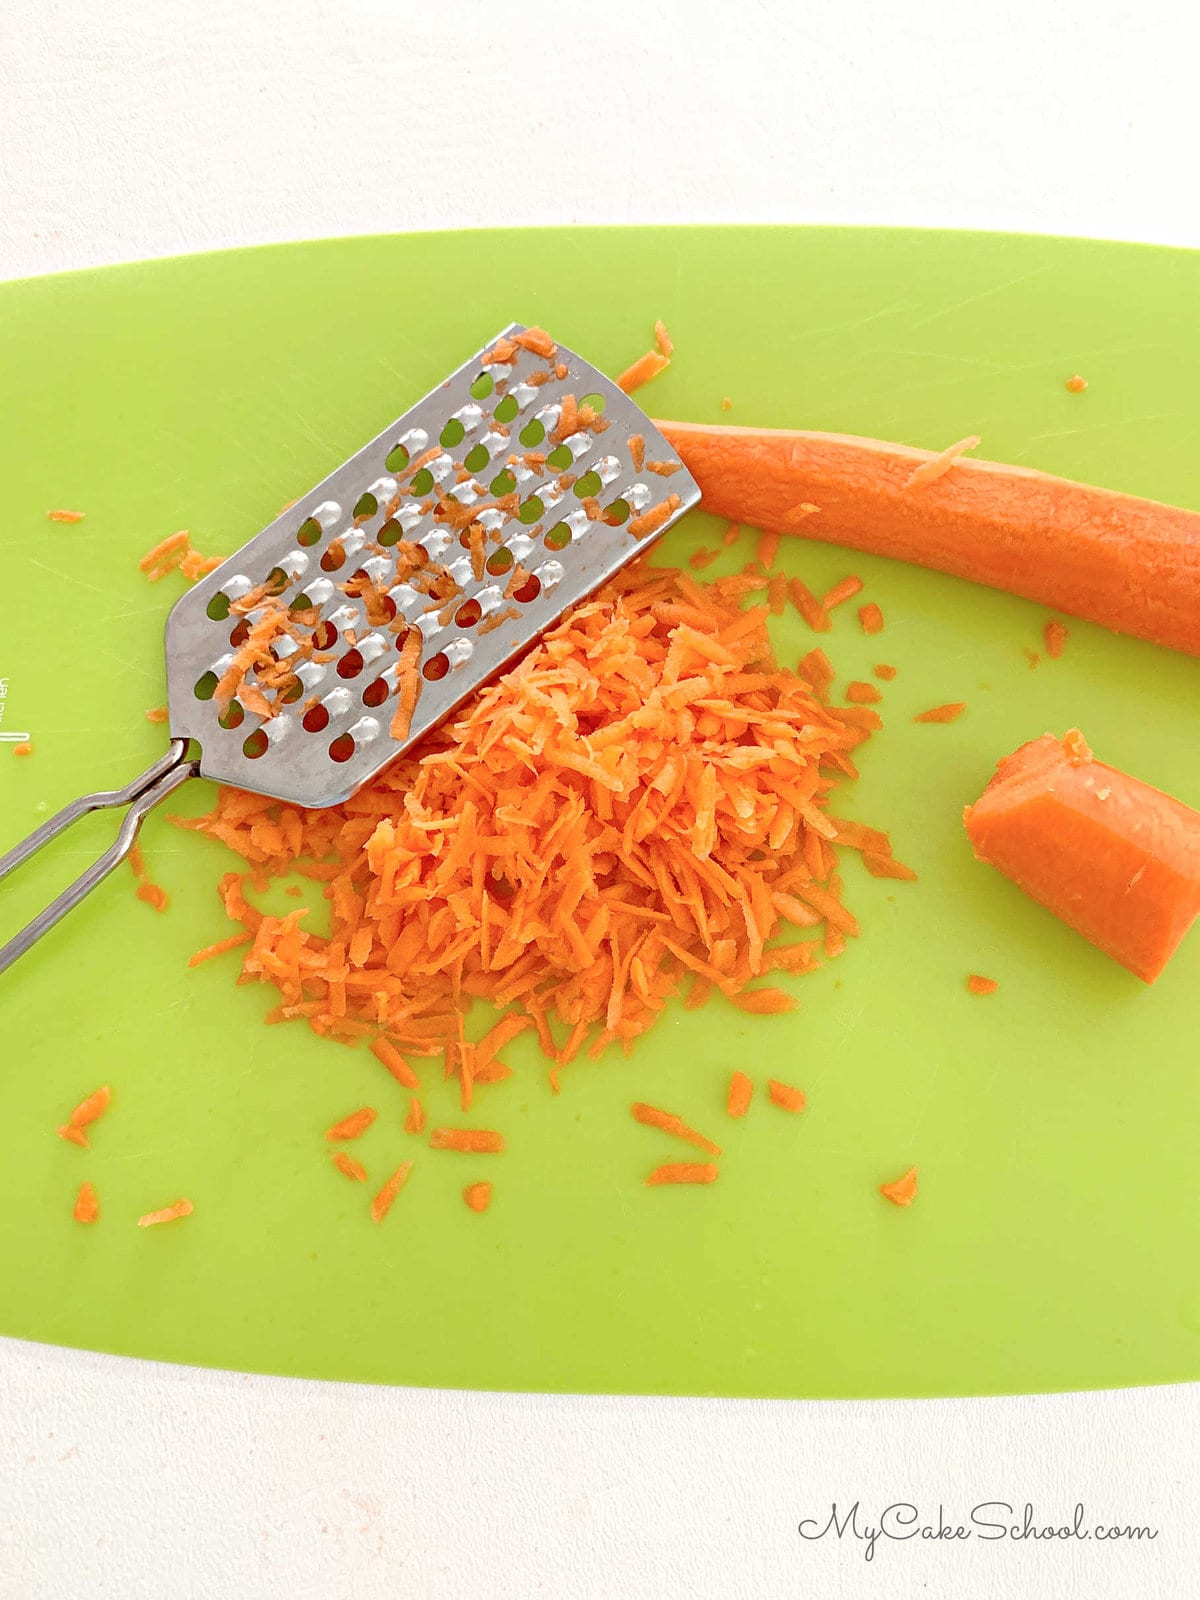 A mound of grated carrots on a cutting board, next to grater and whole carrots.